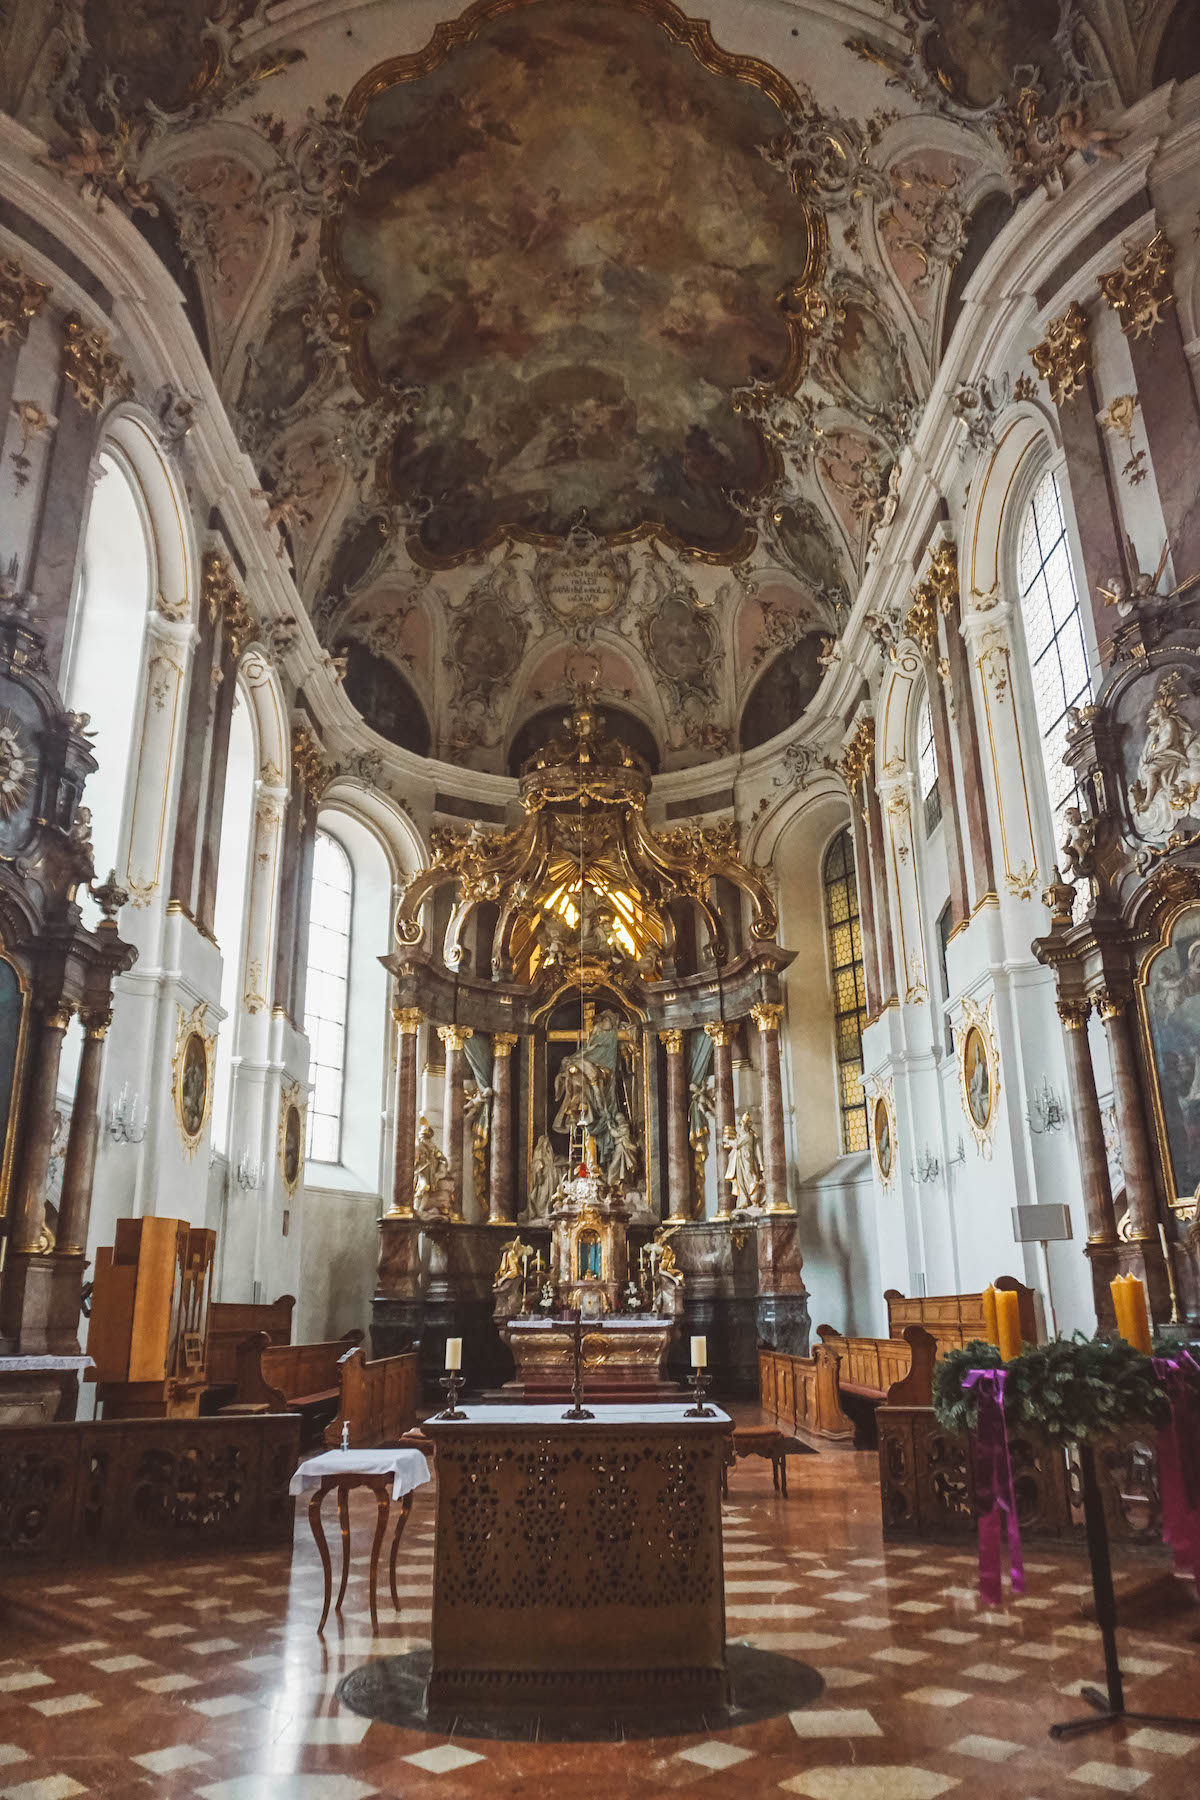 Altar inside the Augustinerkirche in Mainz, Germany